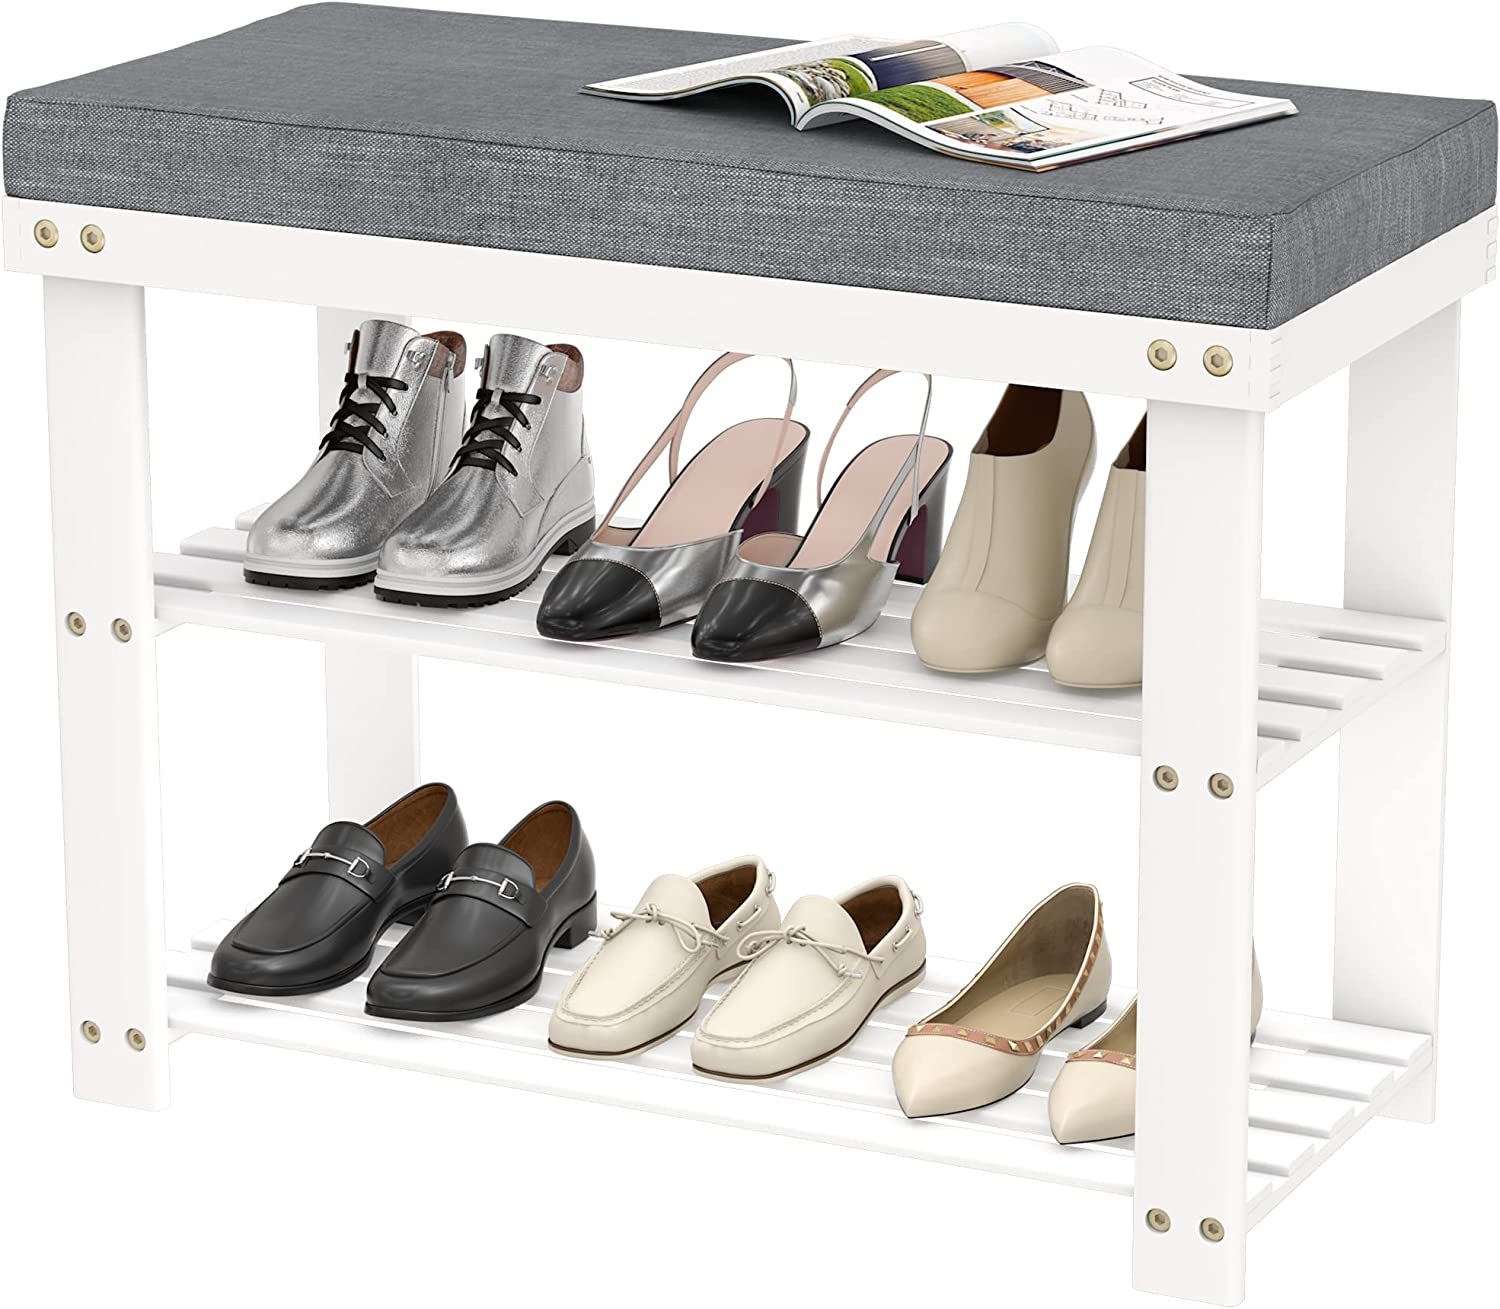 Domax White Shoe Rack Bench for Entryway - Bench with Shoe Storage Front Door Shoe Bench with Cushion Upholstered Padded Seat 3 Tier Bamboo Shoe